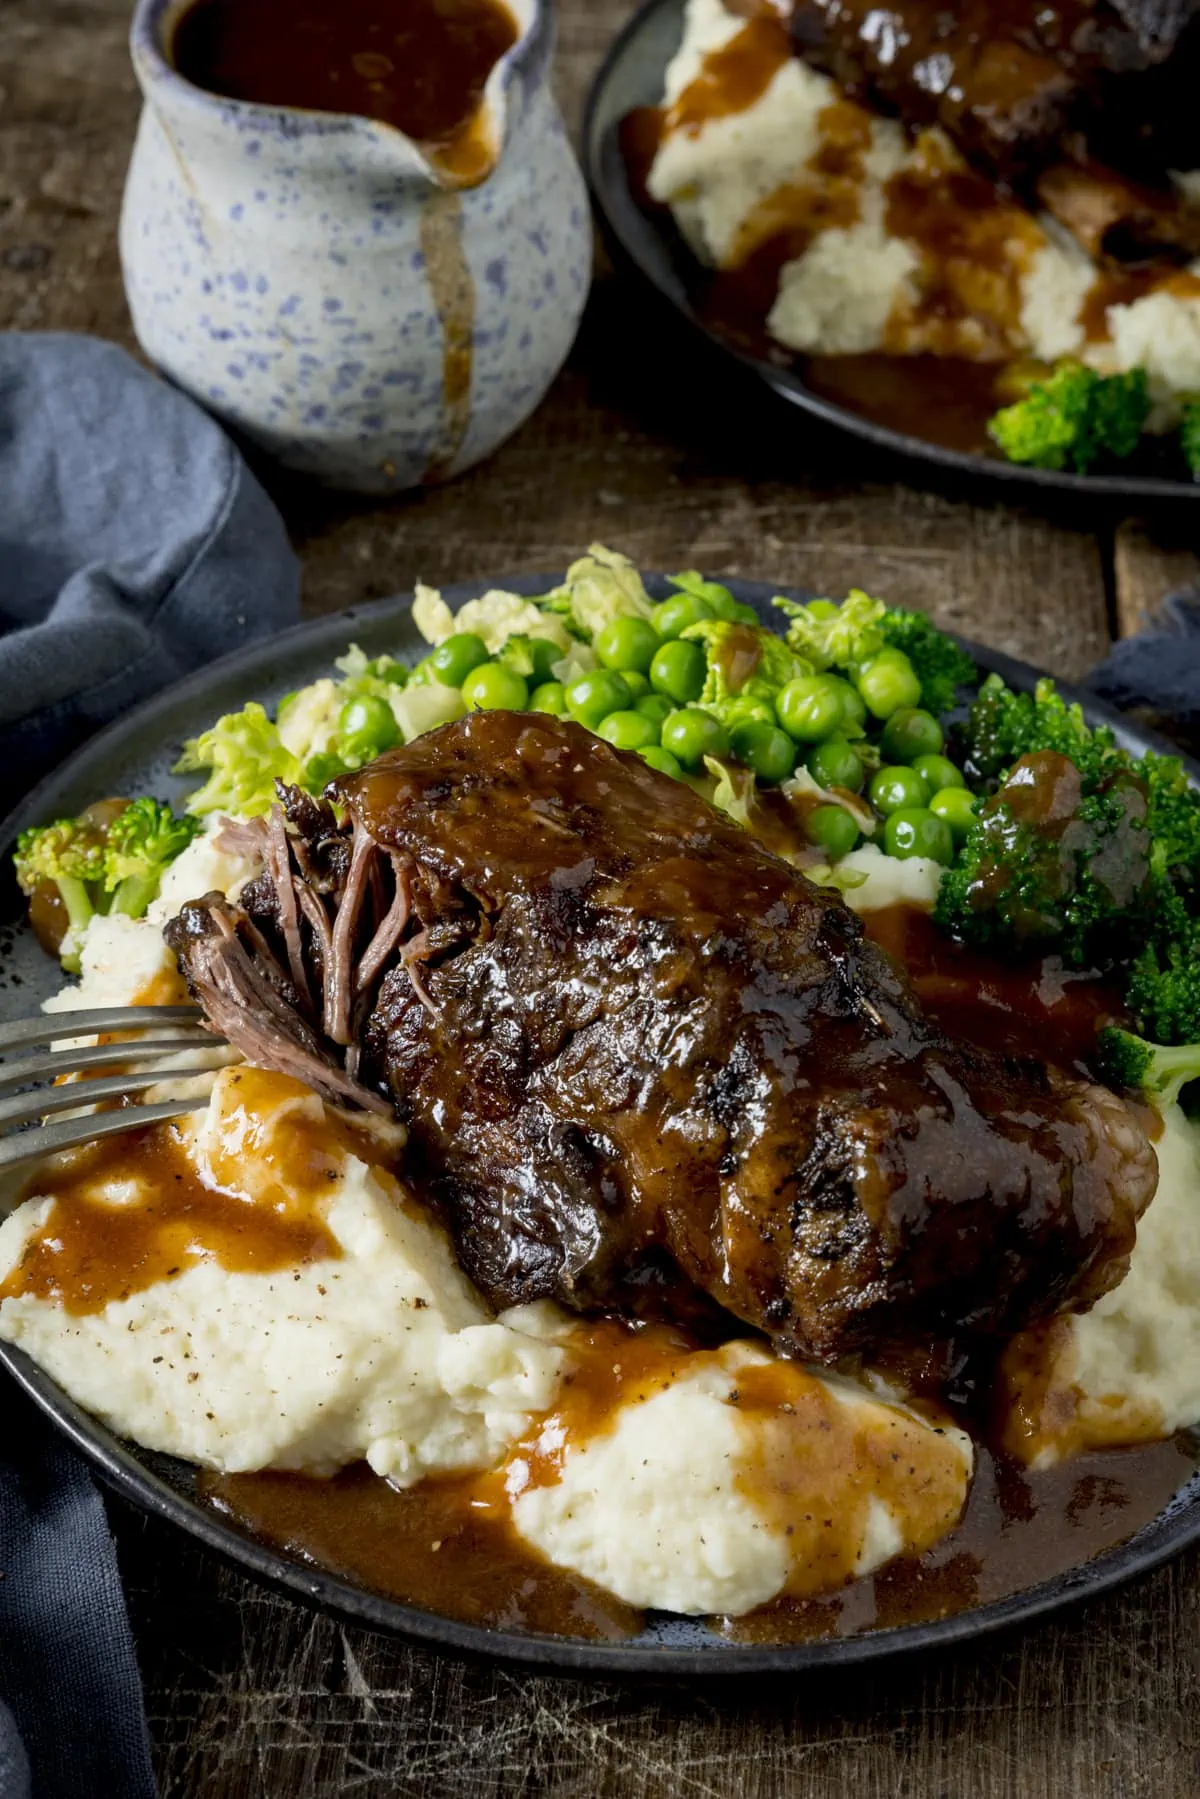 A close up of slow cooked beef short rib with gravy on a plate of mashed potatoes, with green vegetables also on the plate. The plate is on a wooden table. There is a forkful being taken from the short rib.